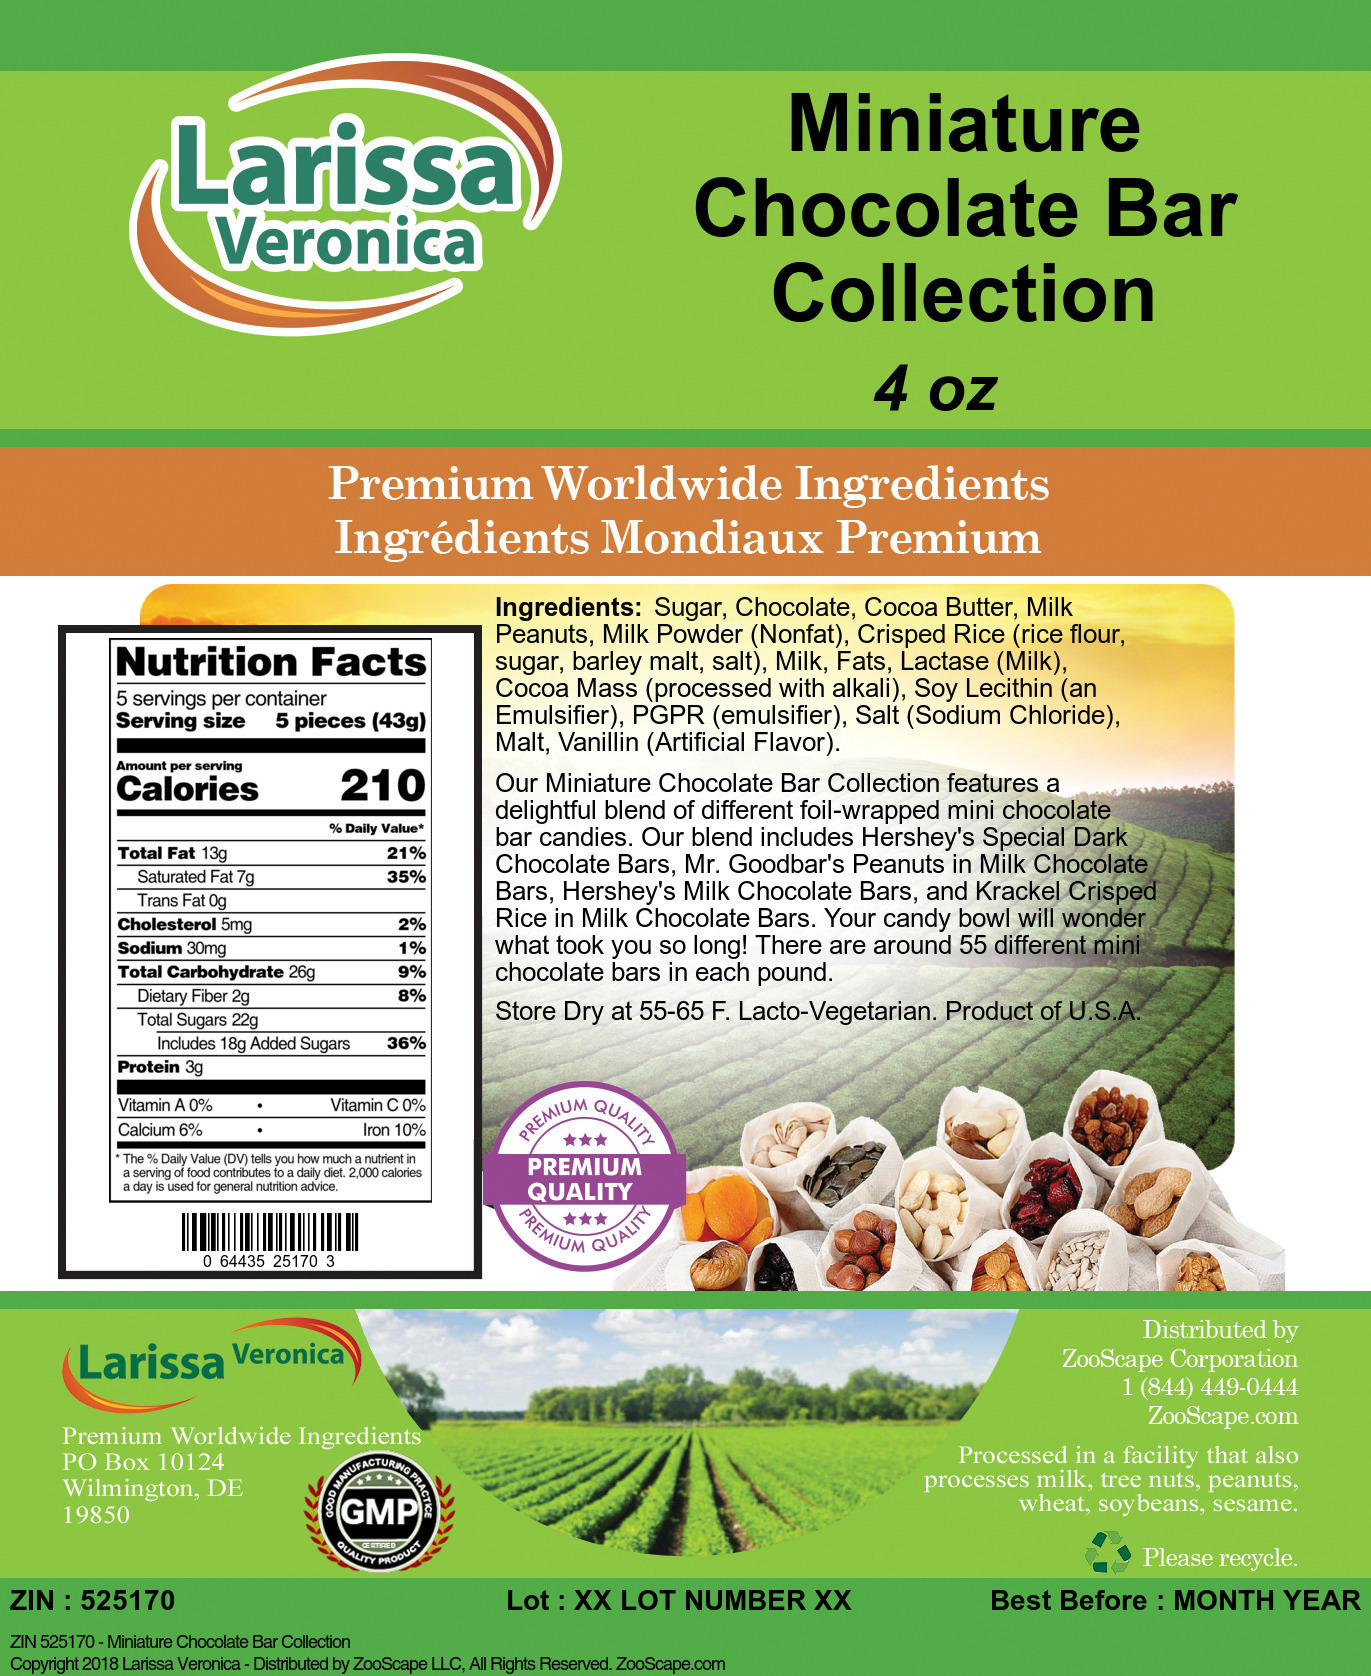 Miniature Chocolate Bar Collection - Label